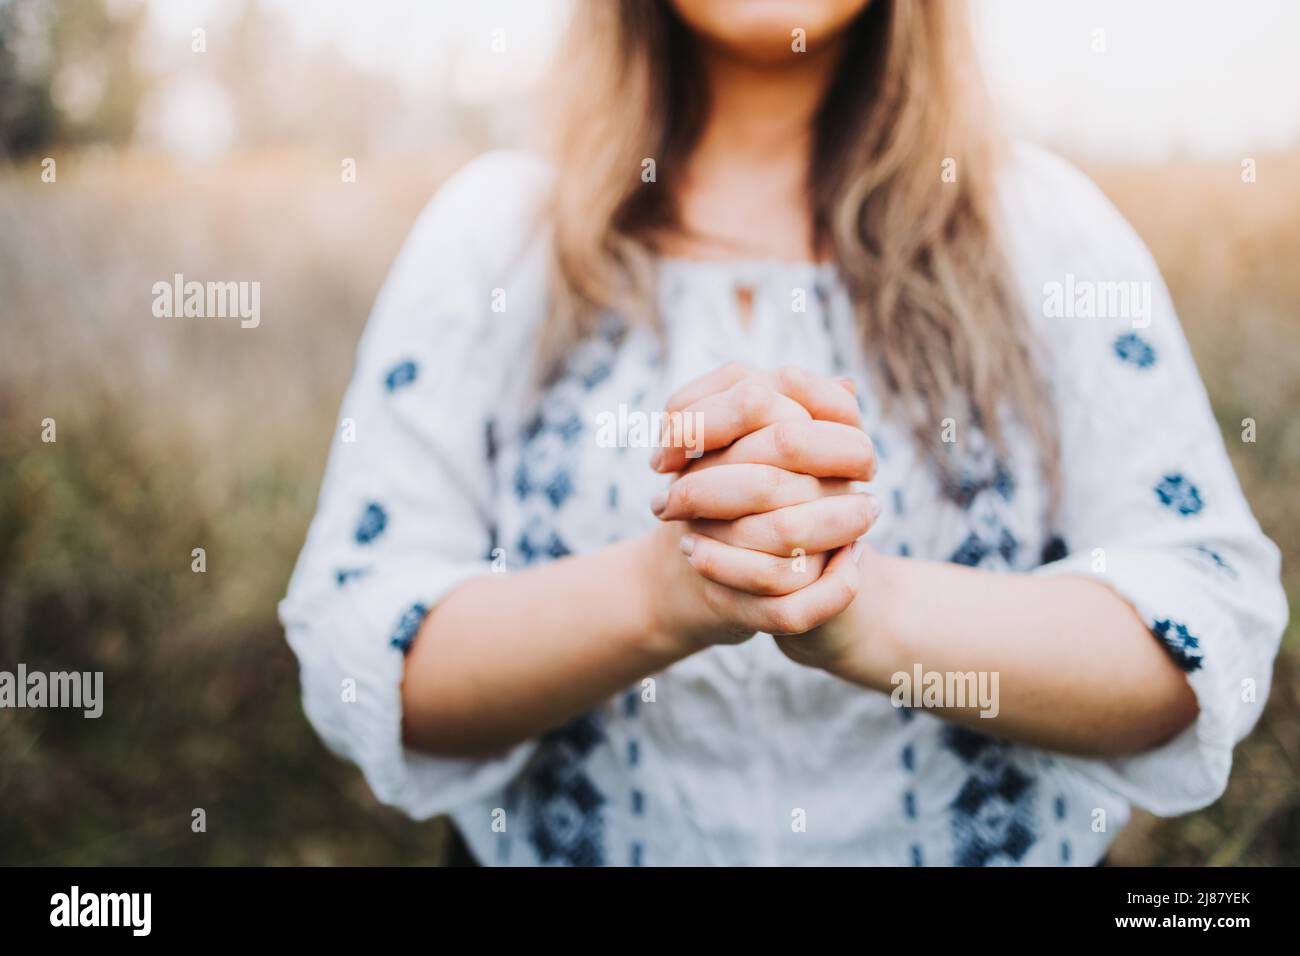 Unrecognizable woman outside praying on her knees with her hands together. Selective focus Stock Photo